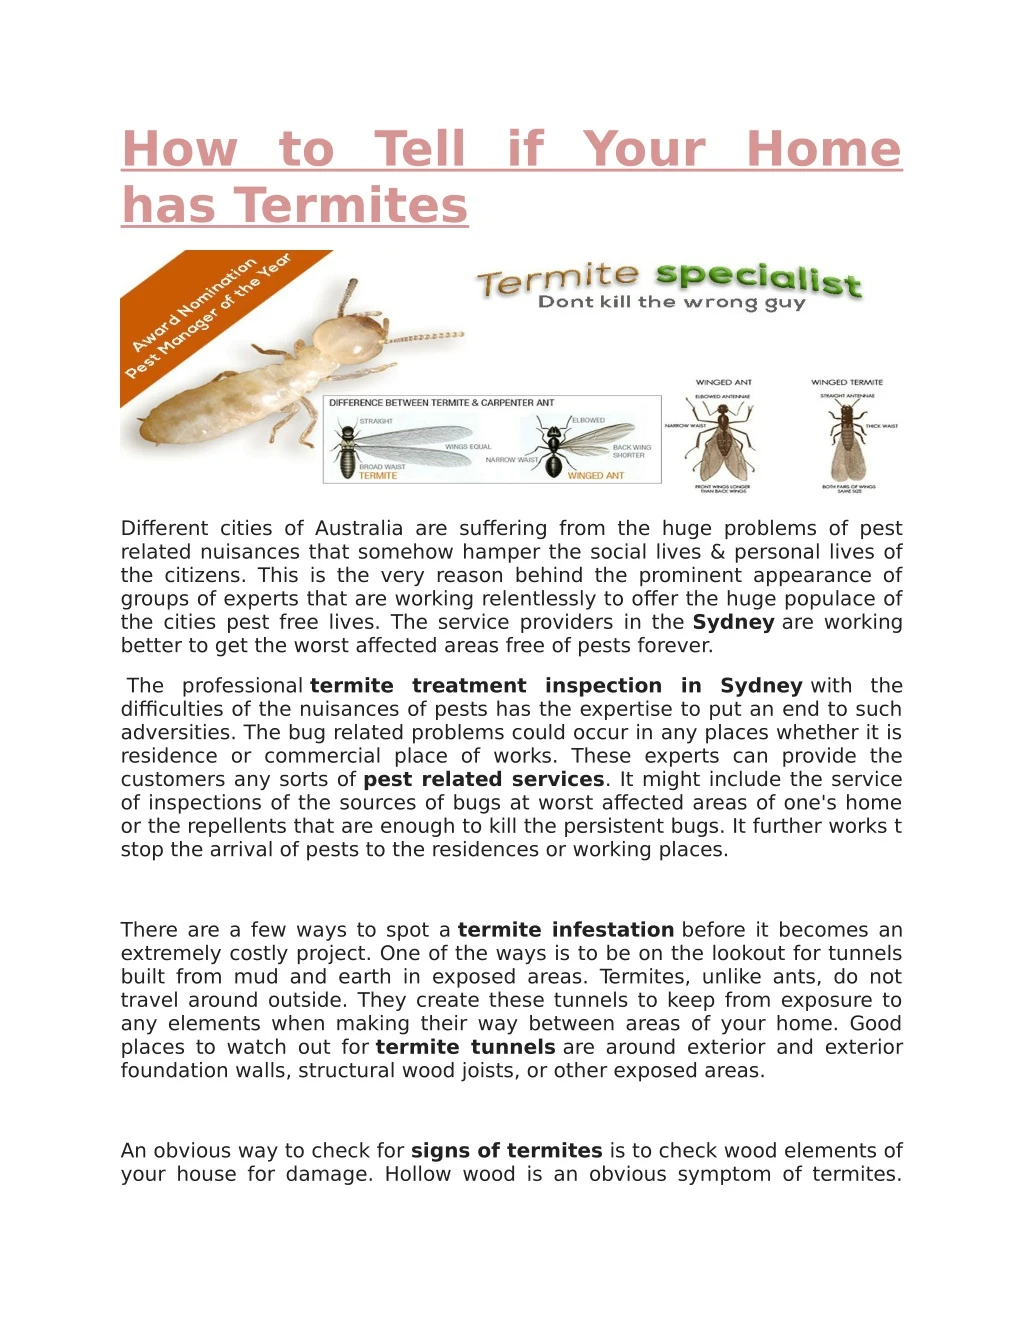 how to tell if your home has termites